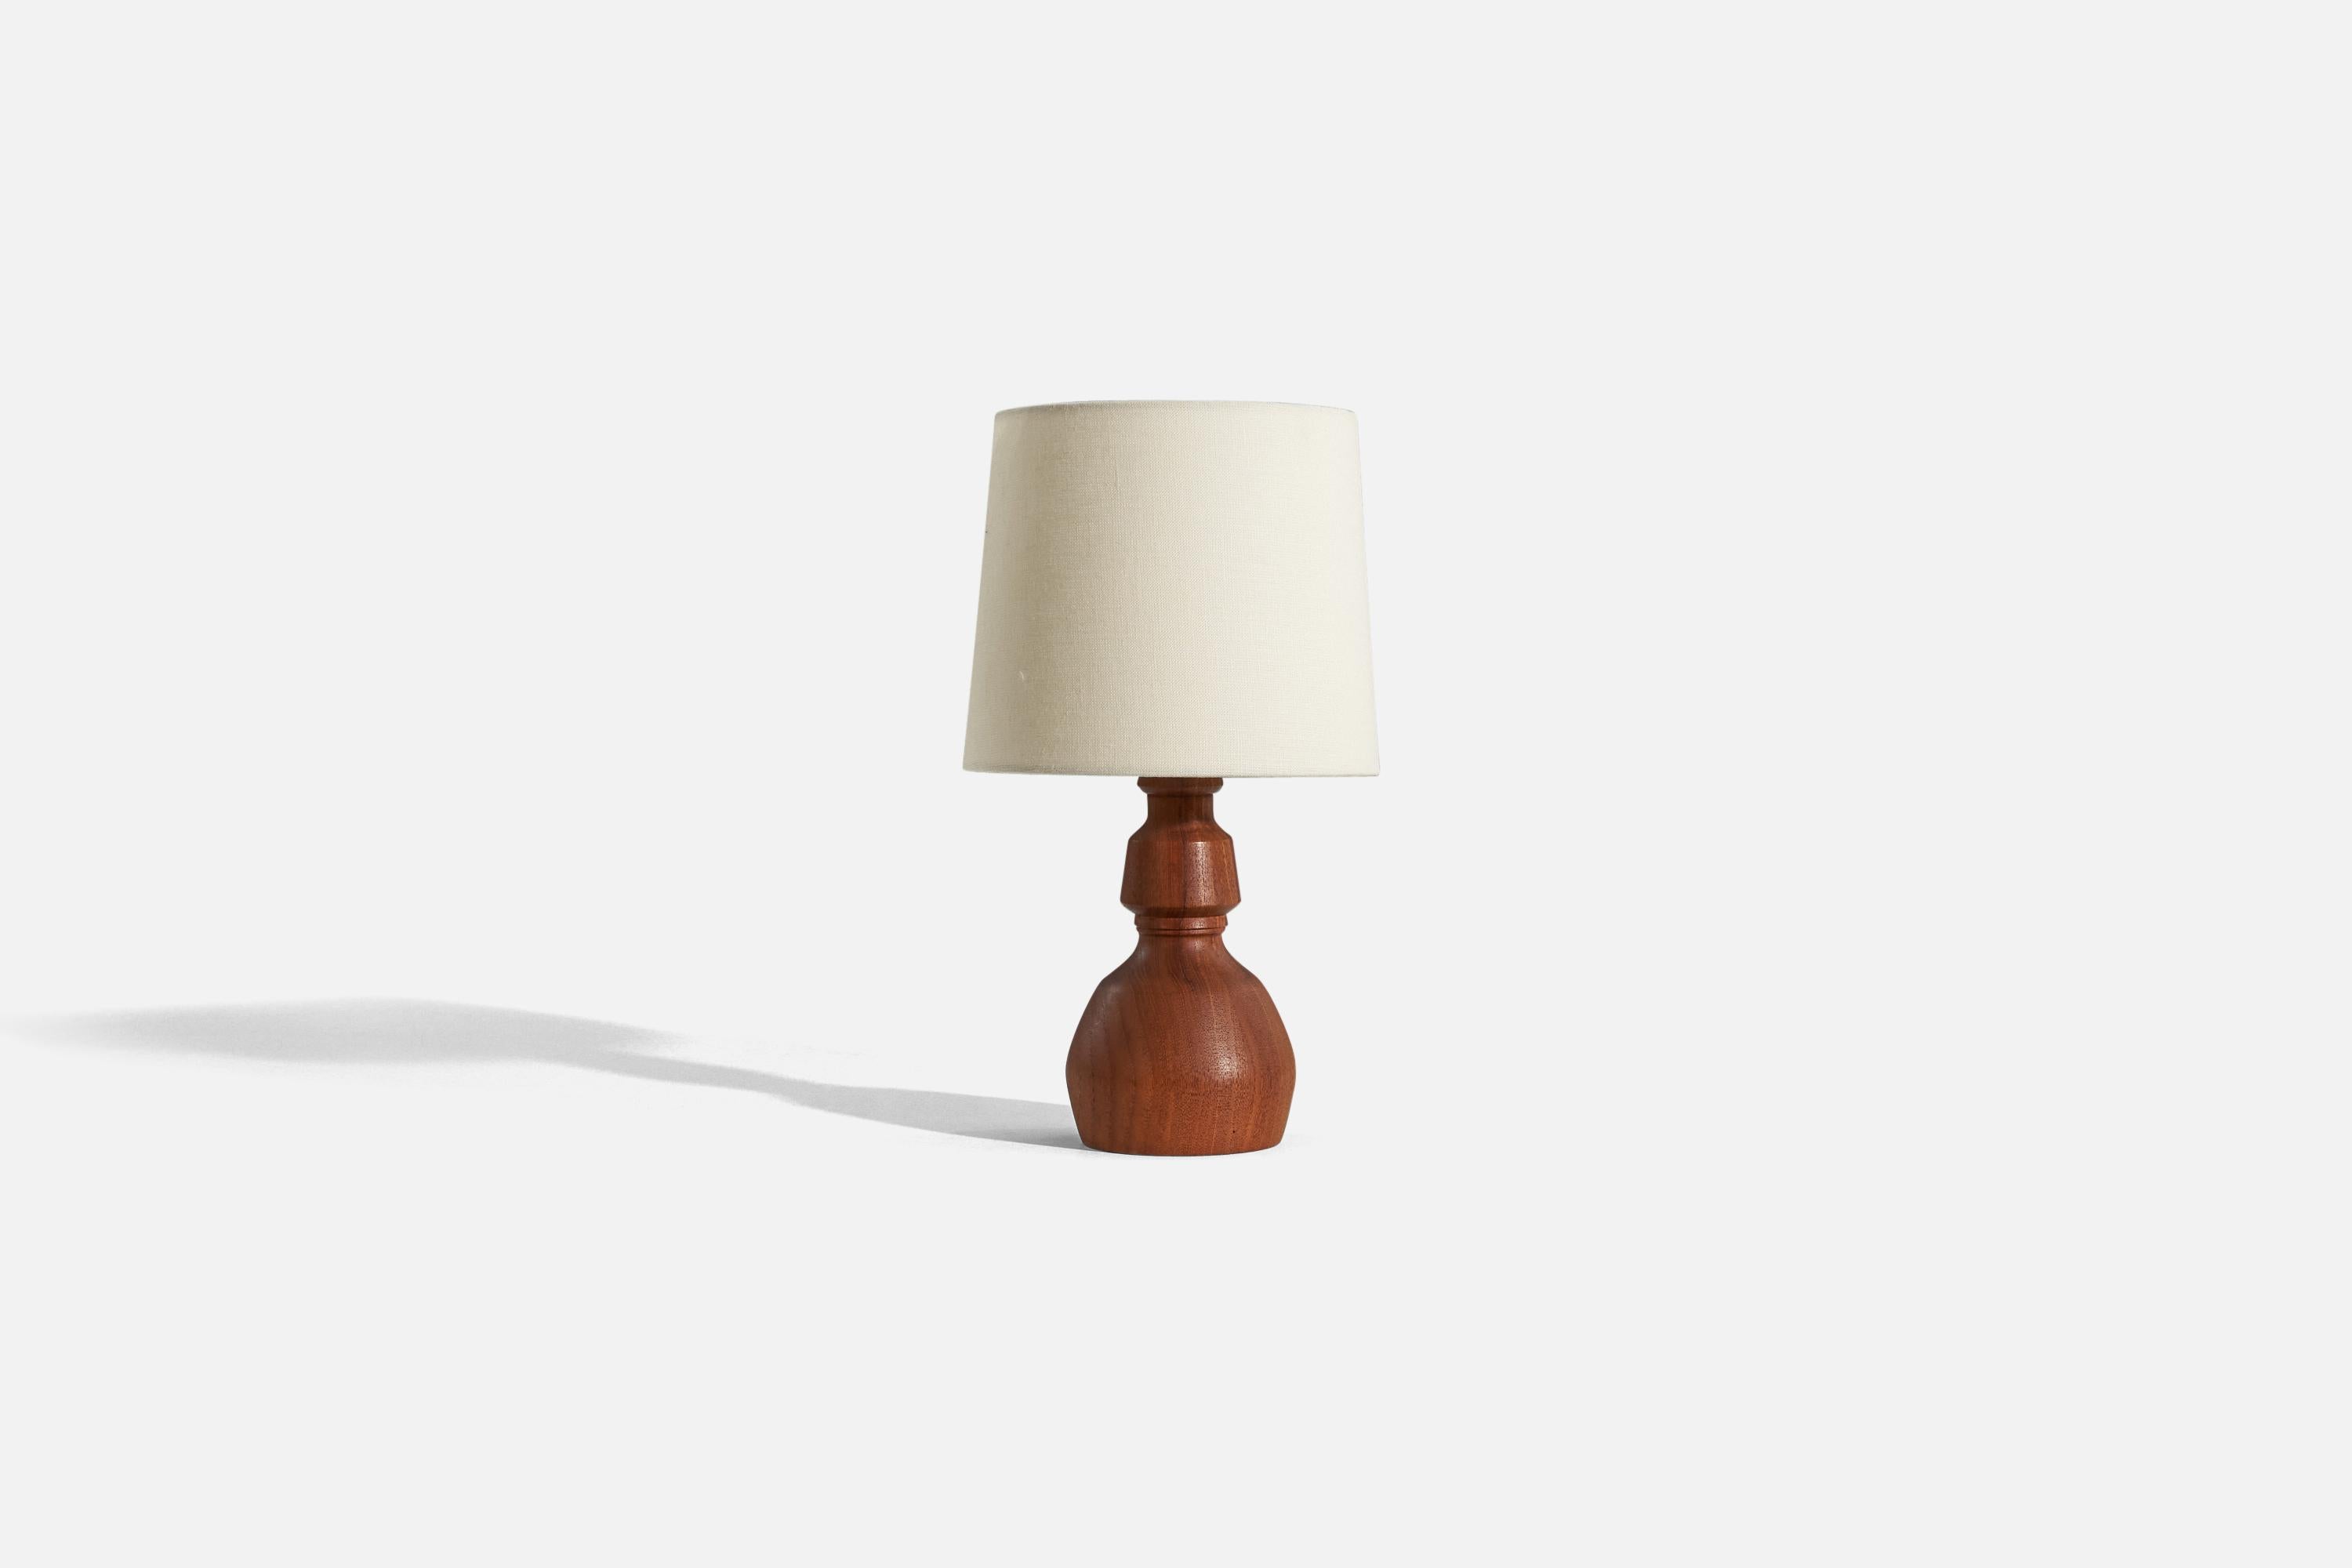 A wooden table lamp designed and produced in Sweden, c. 1970s.

Sold without lampshade. 
Dimensions of Lamp (inches) : 10.1875 x 4.6875 x 4.6875 (H x W x D)
Dimensions of Shade (inches) : 7 x 8 x 7 (T x B x H)
Dimension of Lamp with Shade